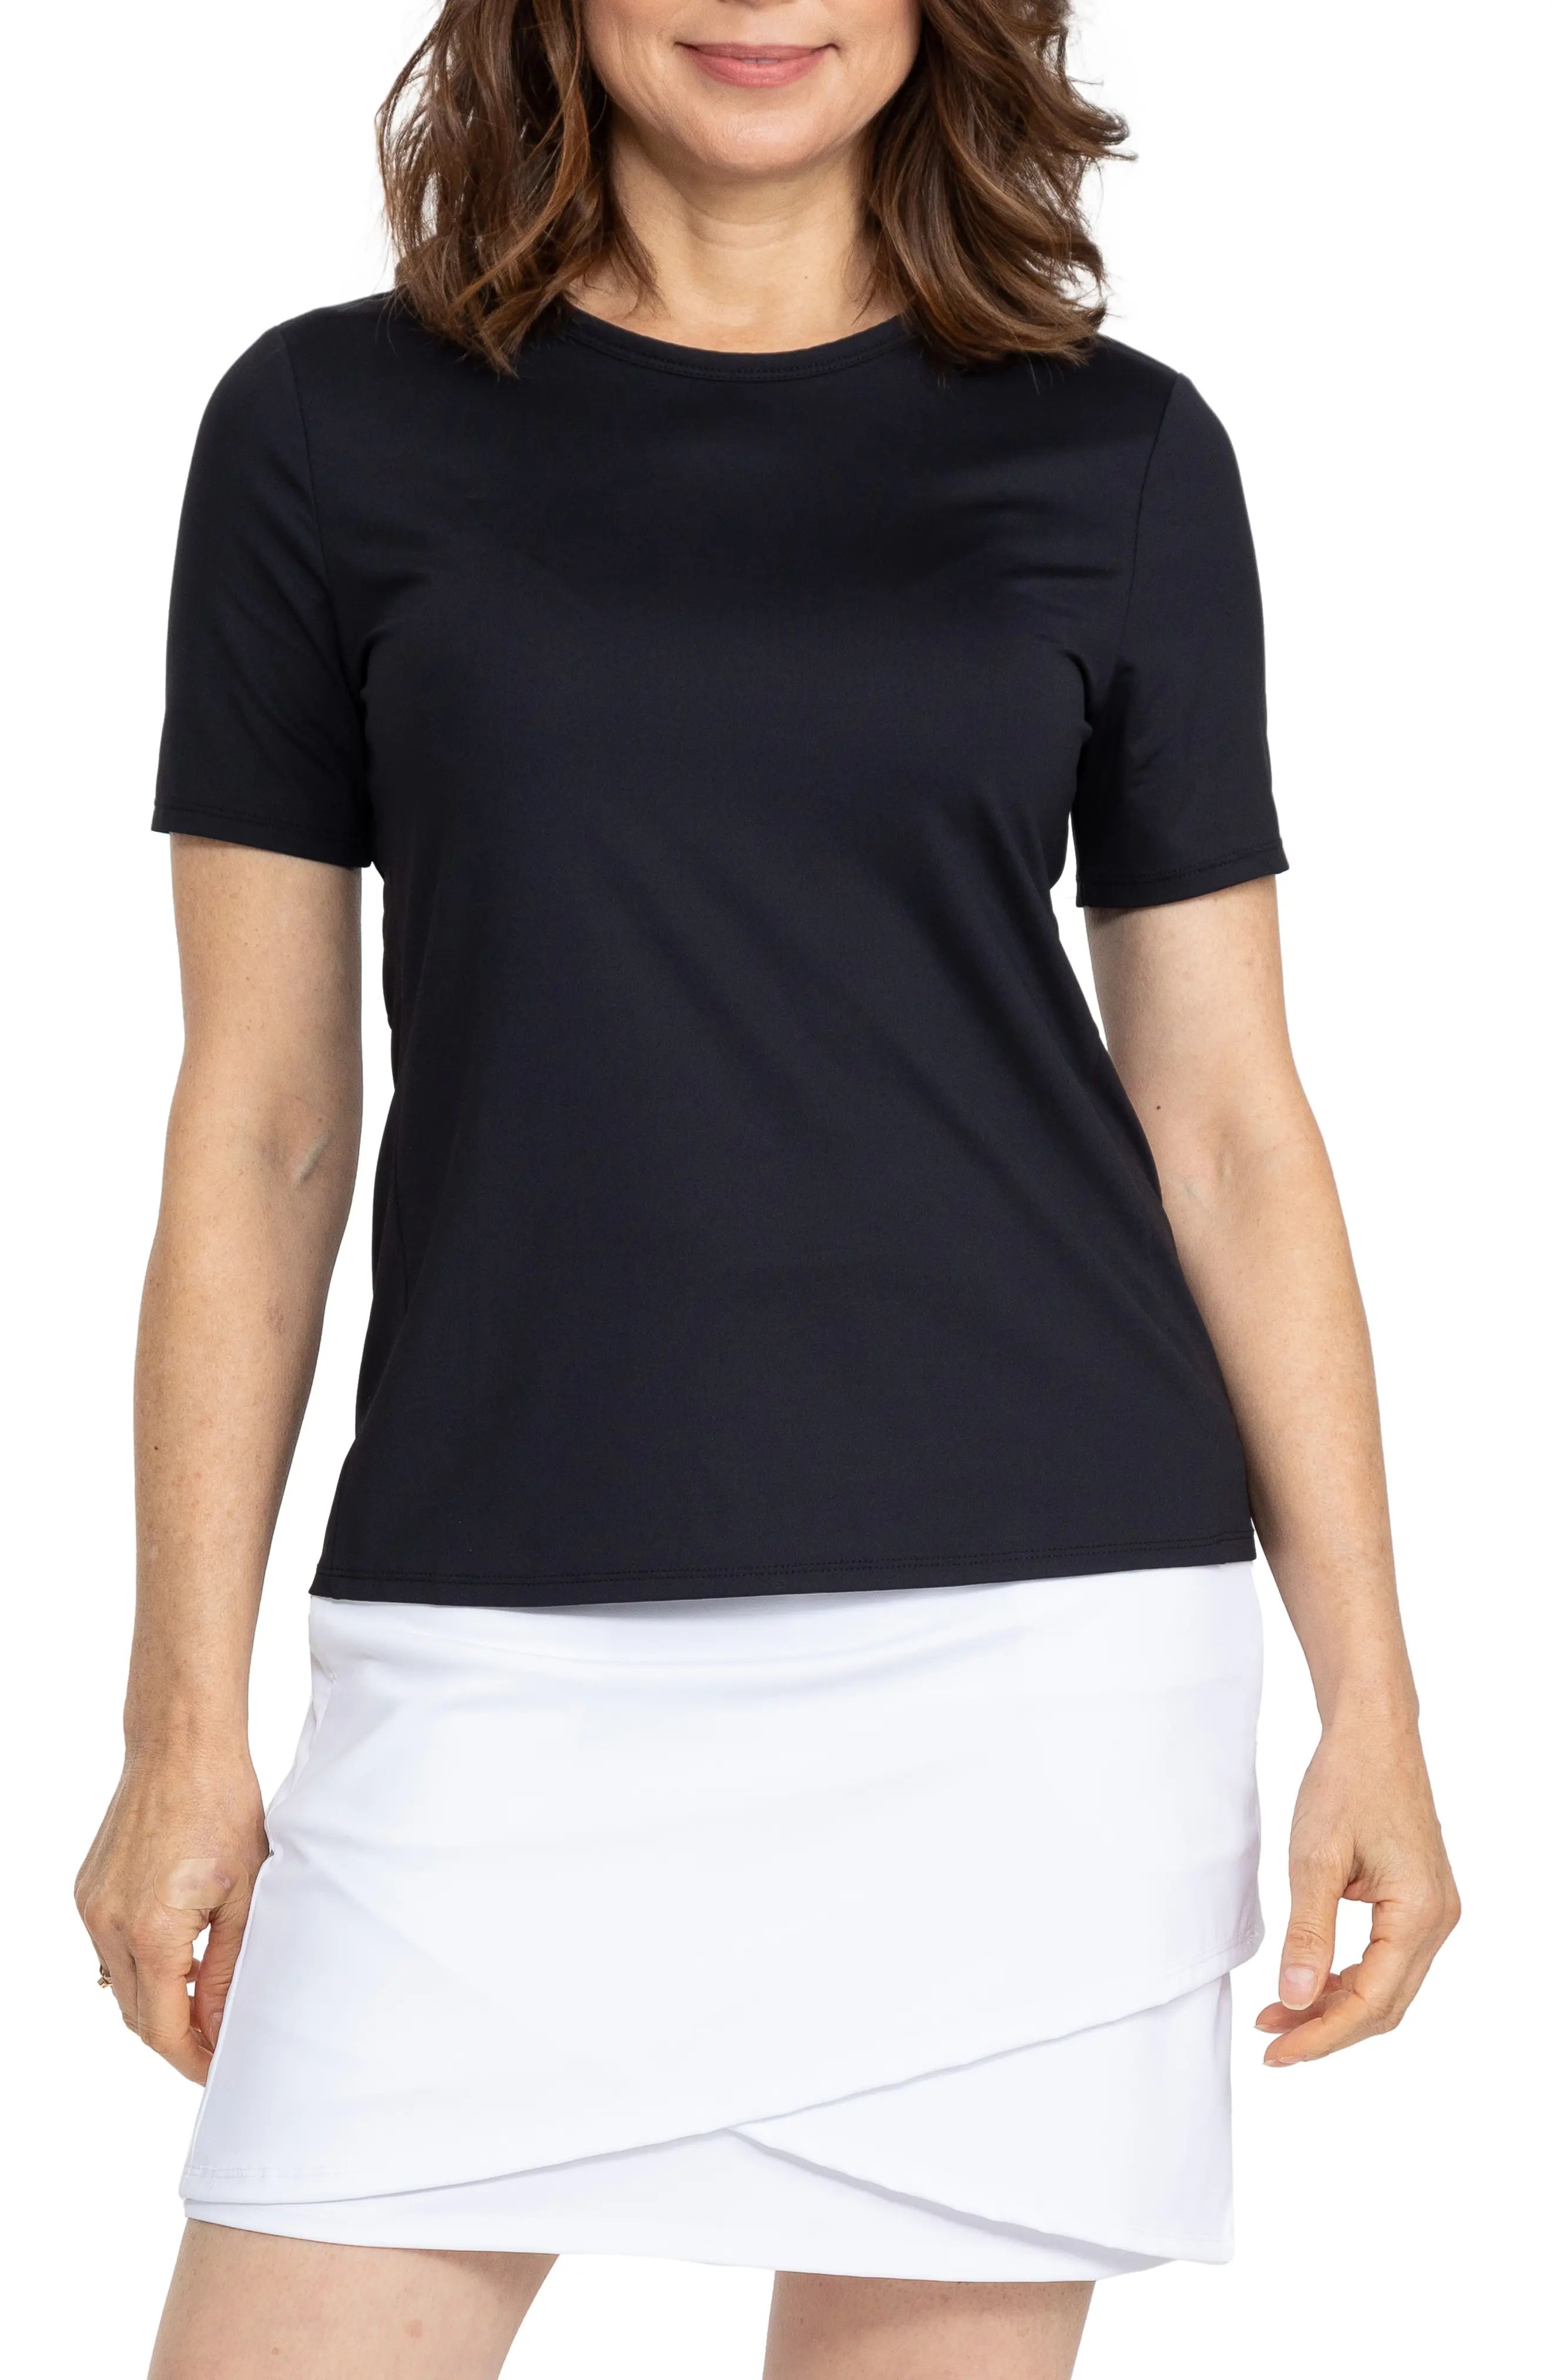 KINONA Tee it Up Golf T-Shirt in Black at Nordstrom, Size X-Small | Nordstrom